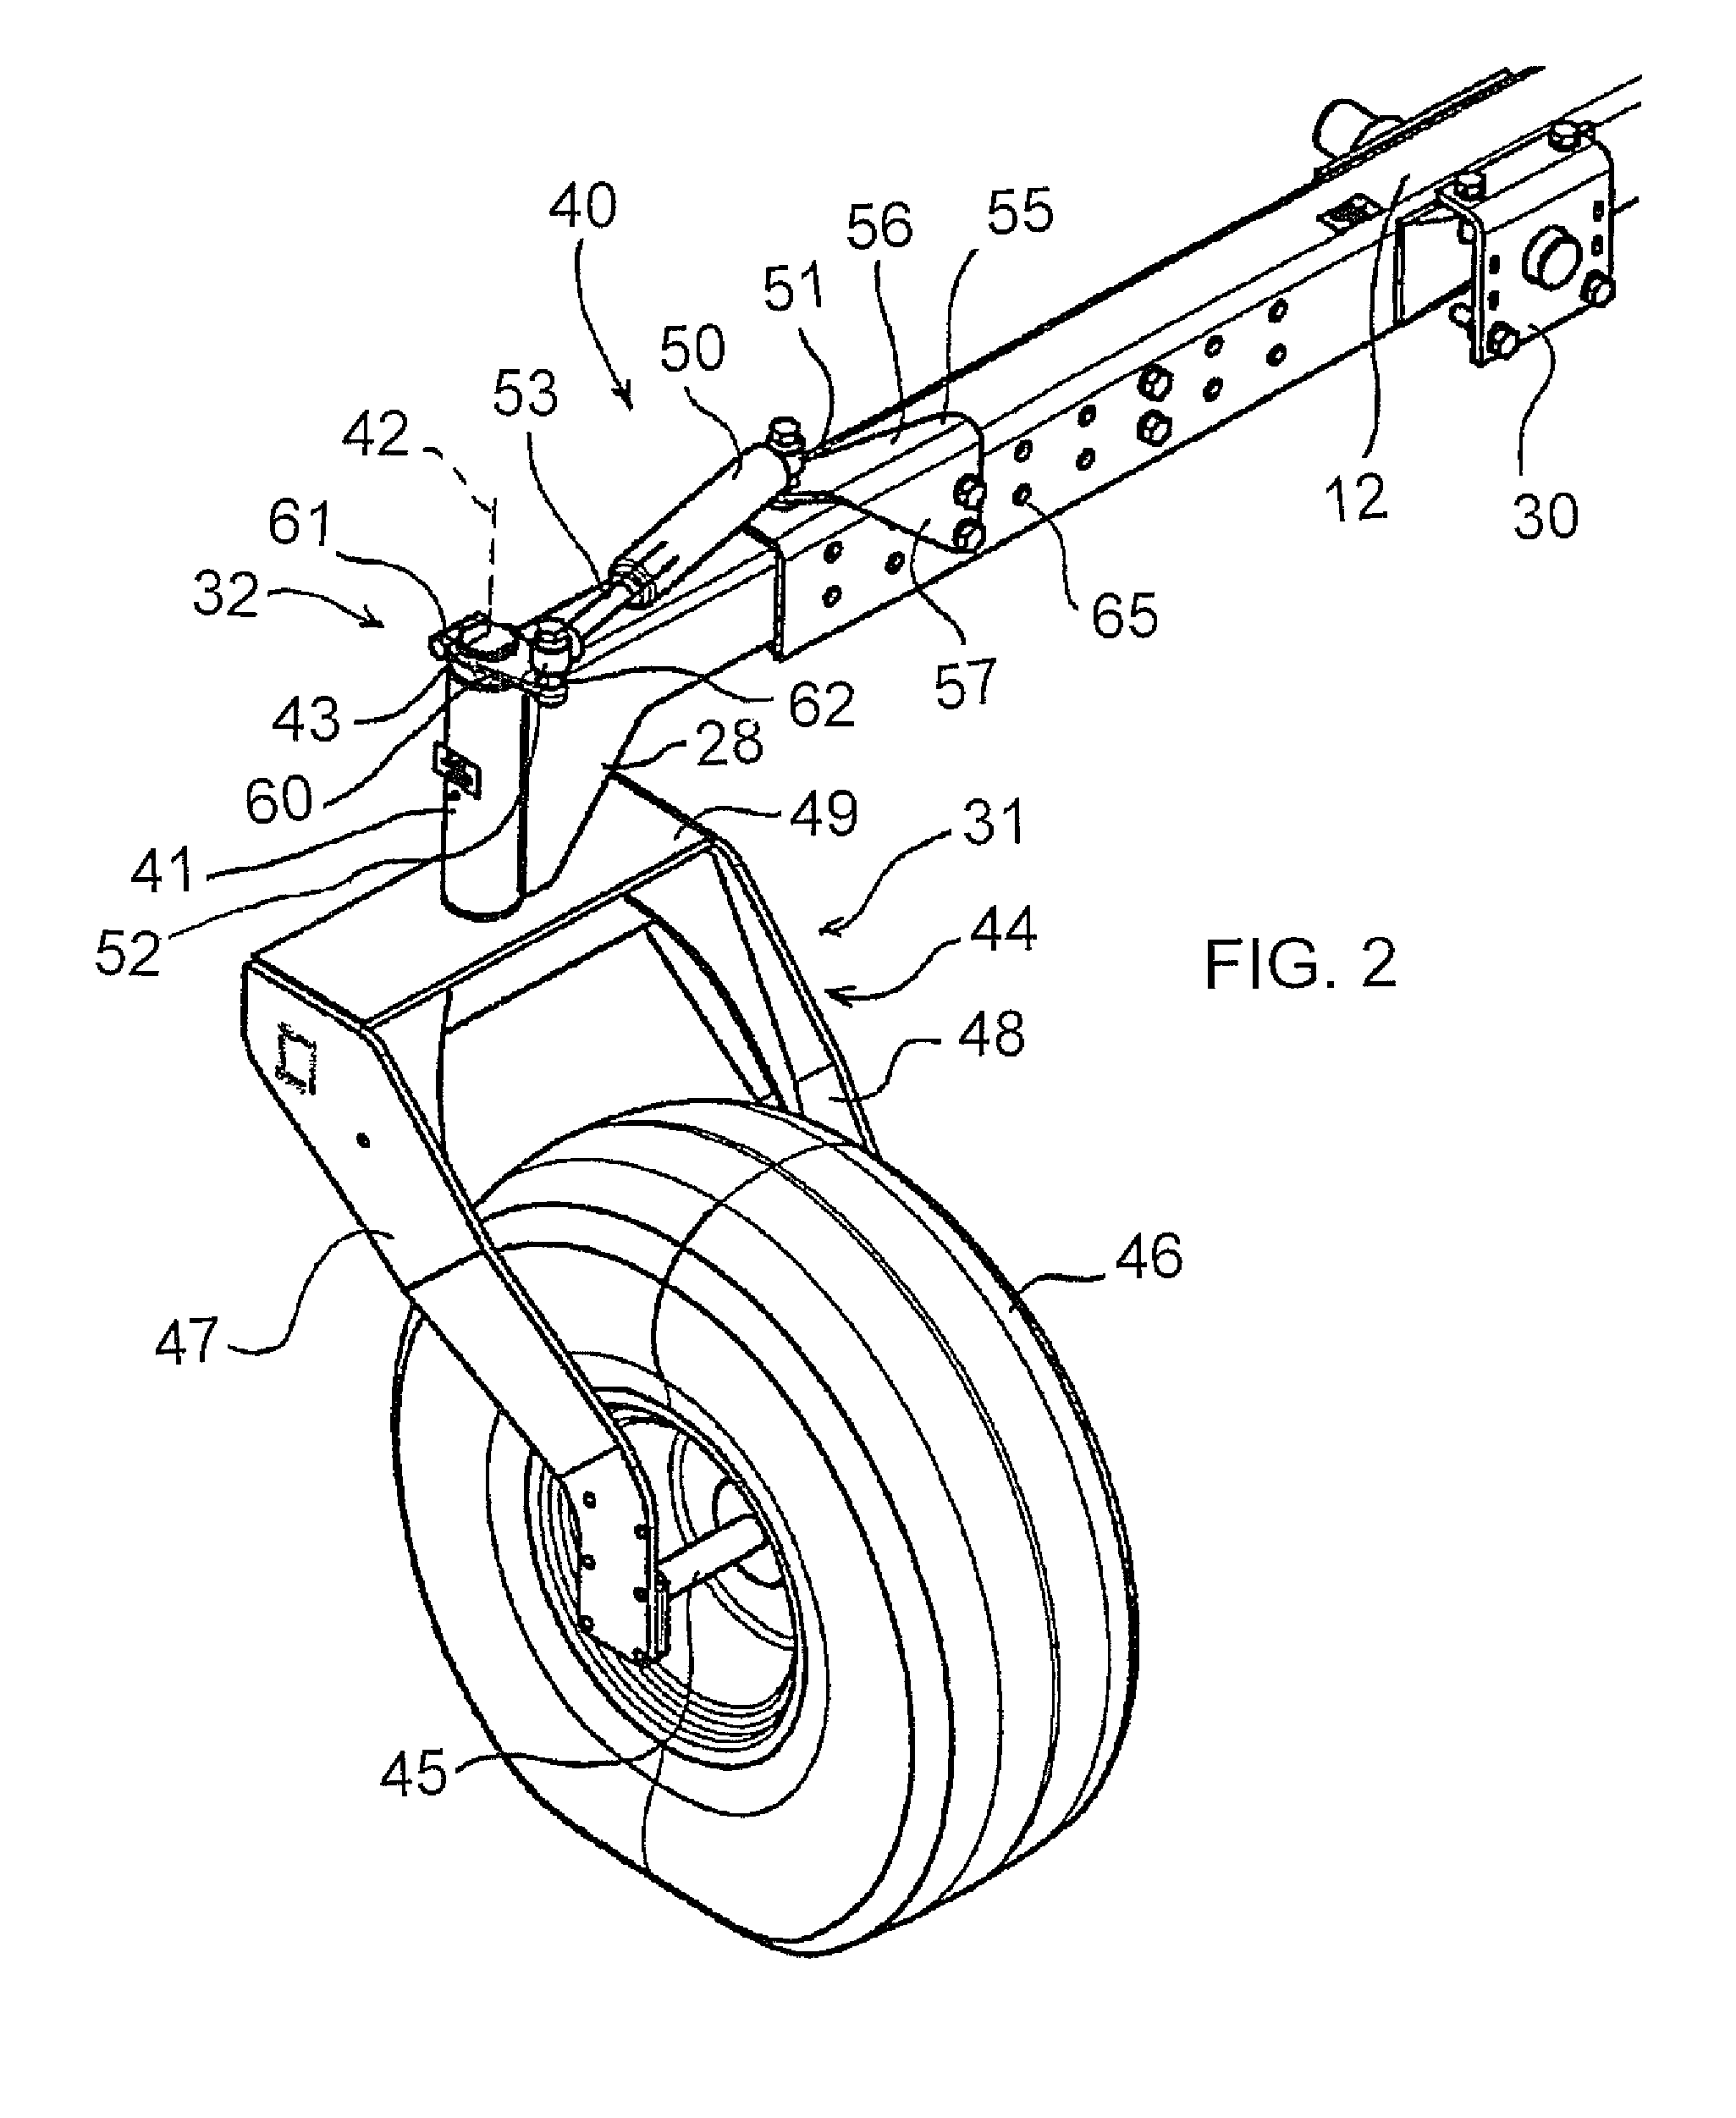 Windrower tractor with rear wheel suspension